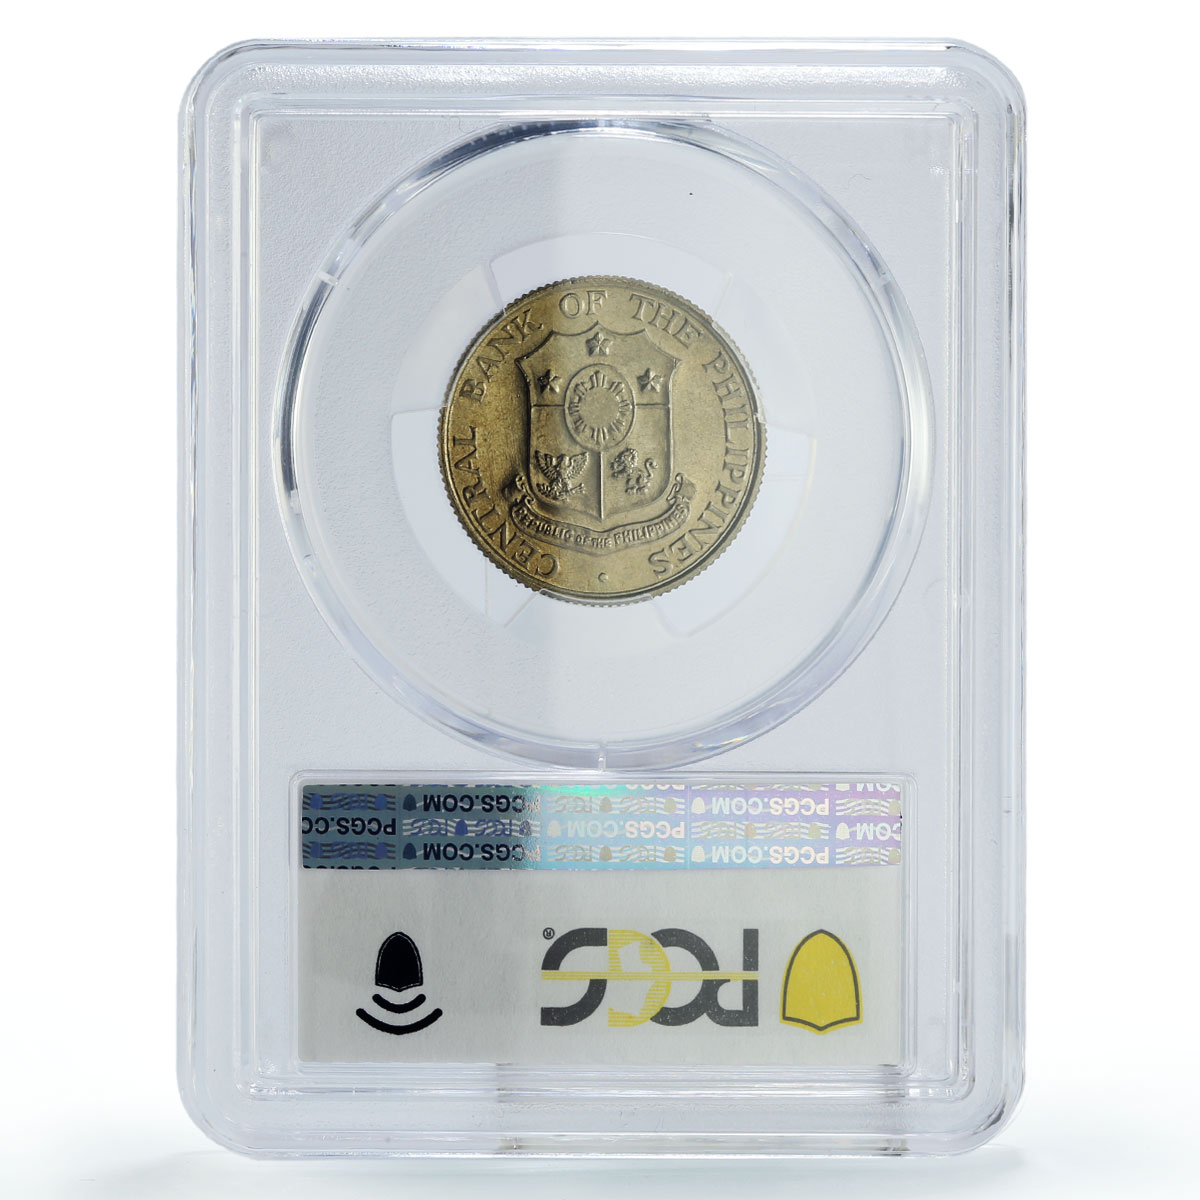 Philippines 25 centavos Regular Coinage Liberty KM189.1 MS66 PCGS CuNi coin 1964